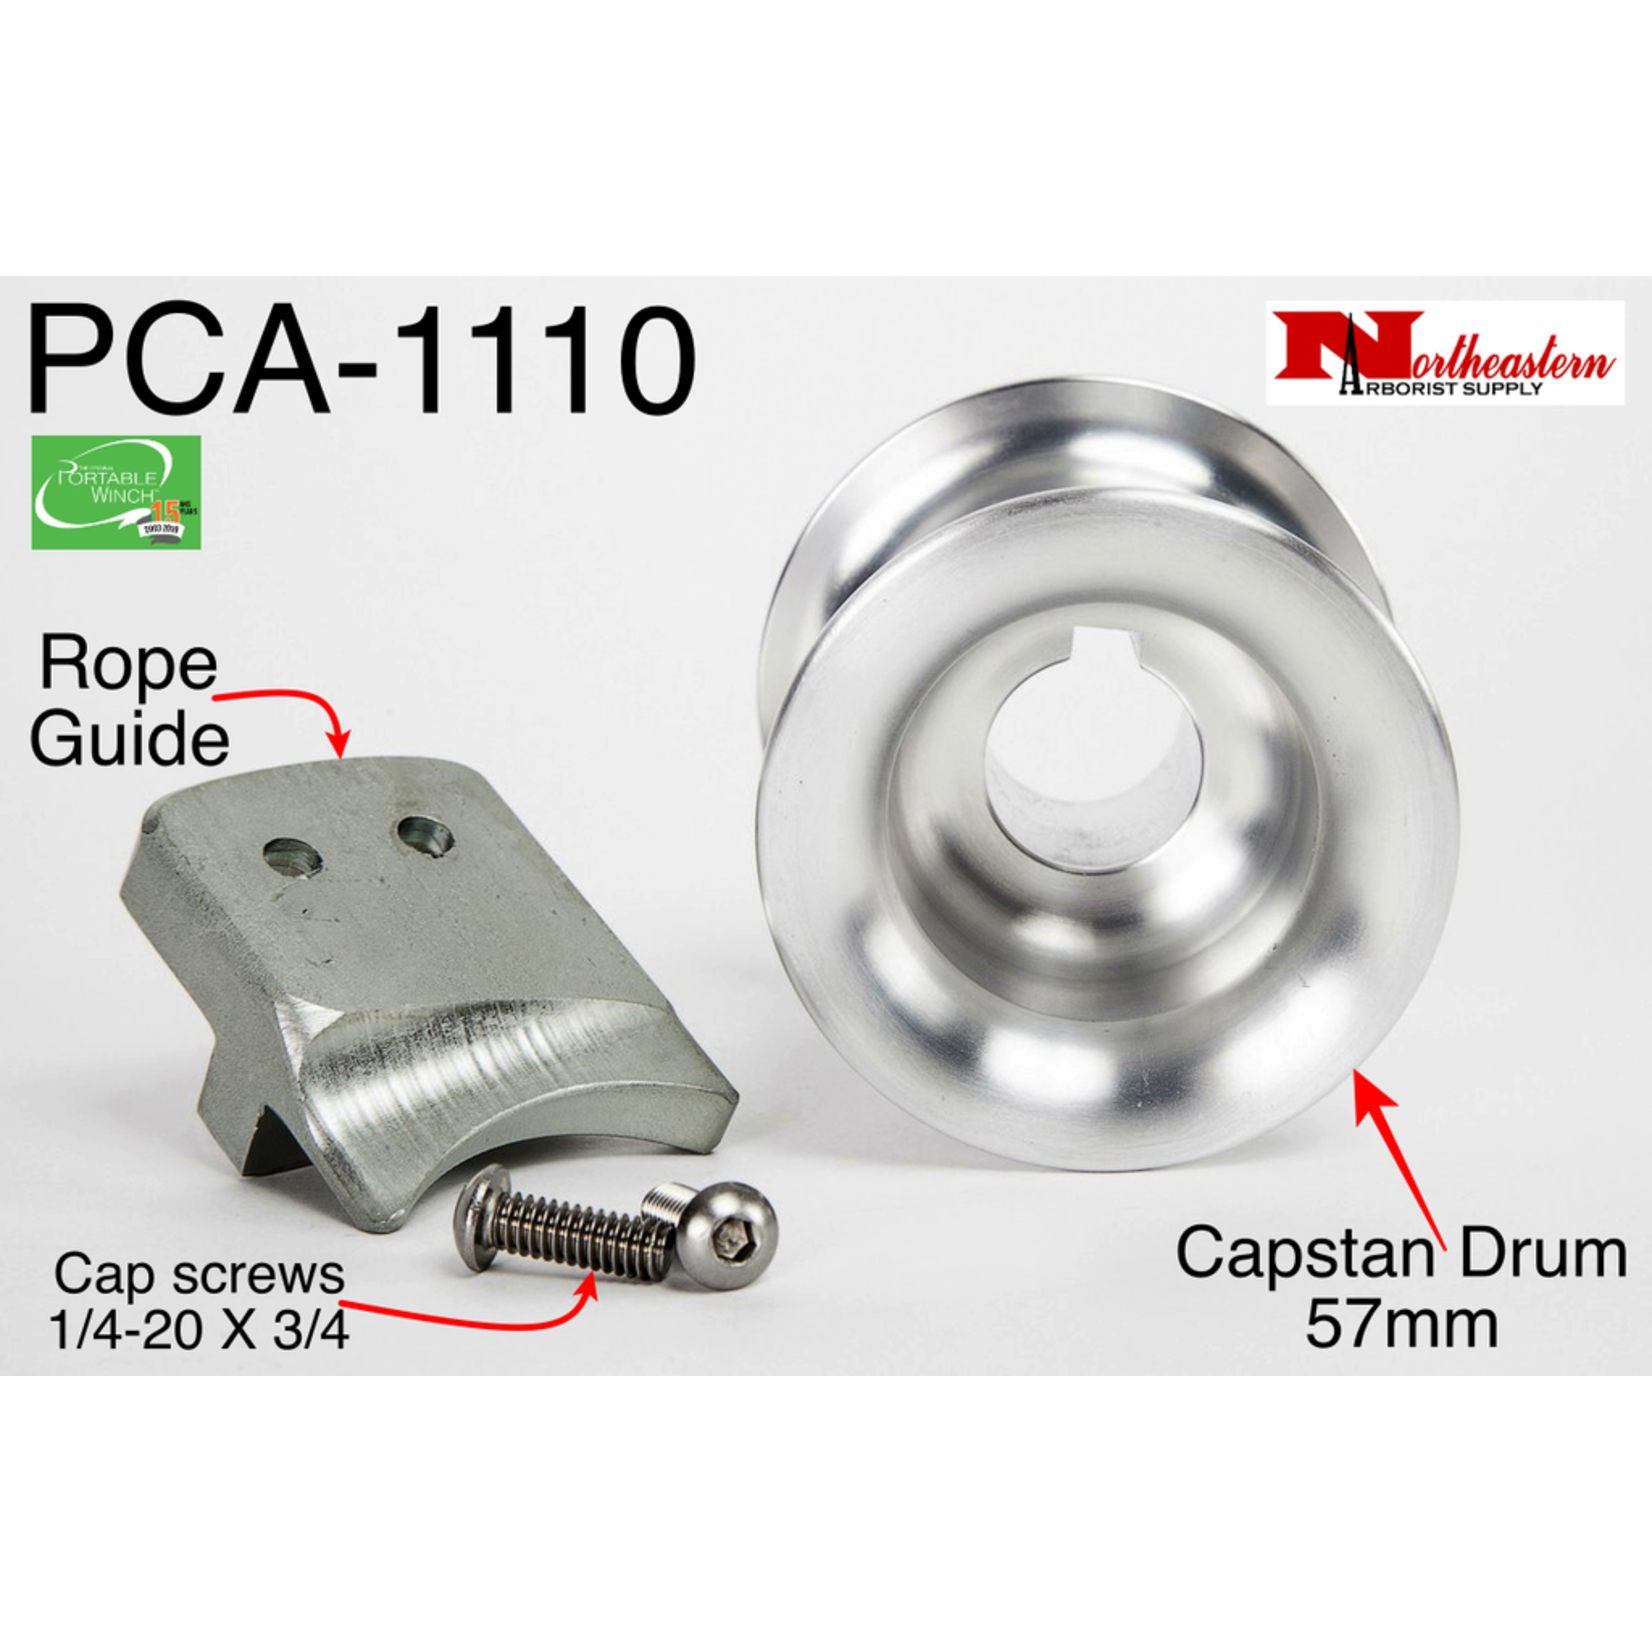 PORTABLE WINCH CO. Capstan Drum 57mm with Rope Guide and SS Screws